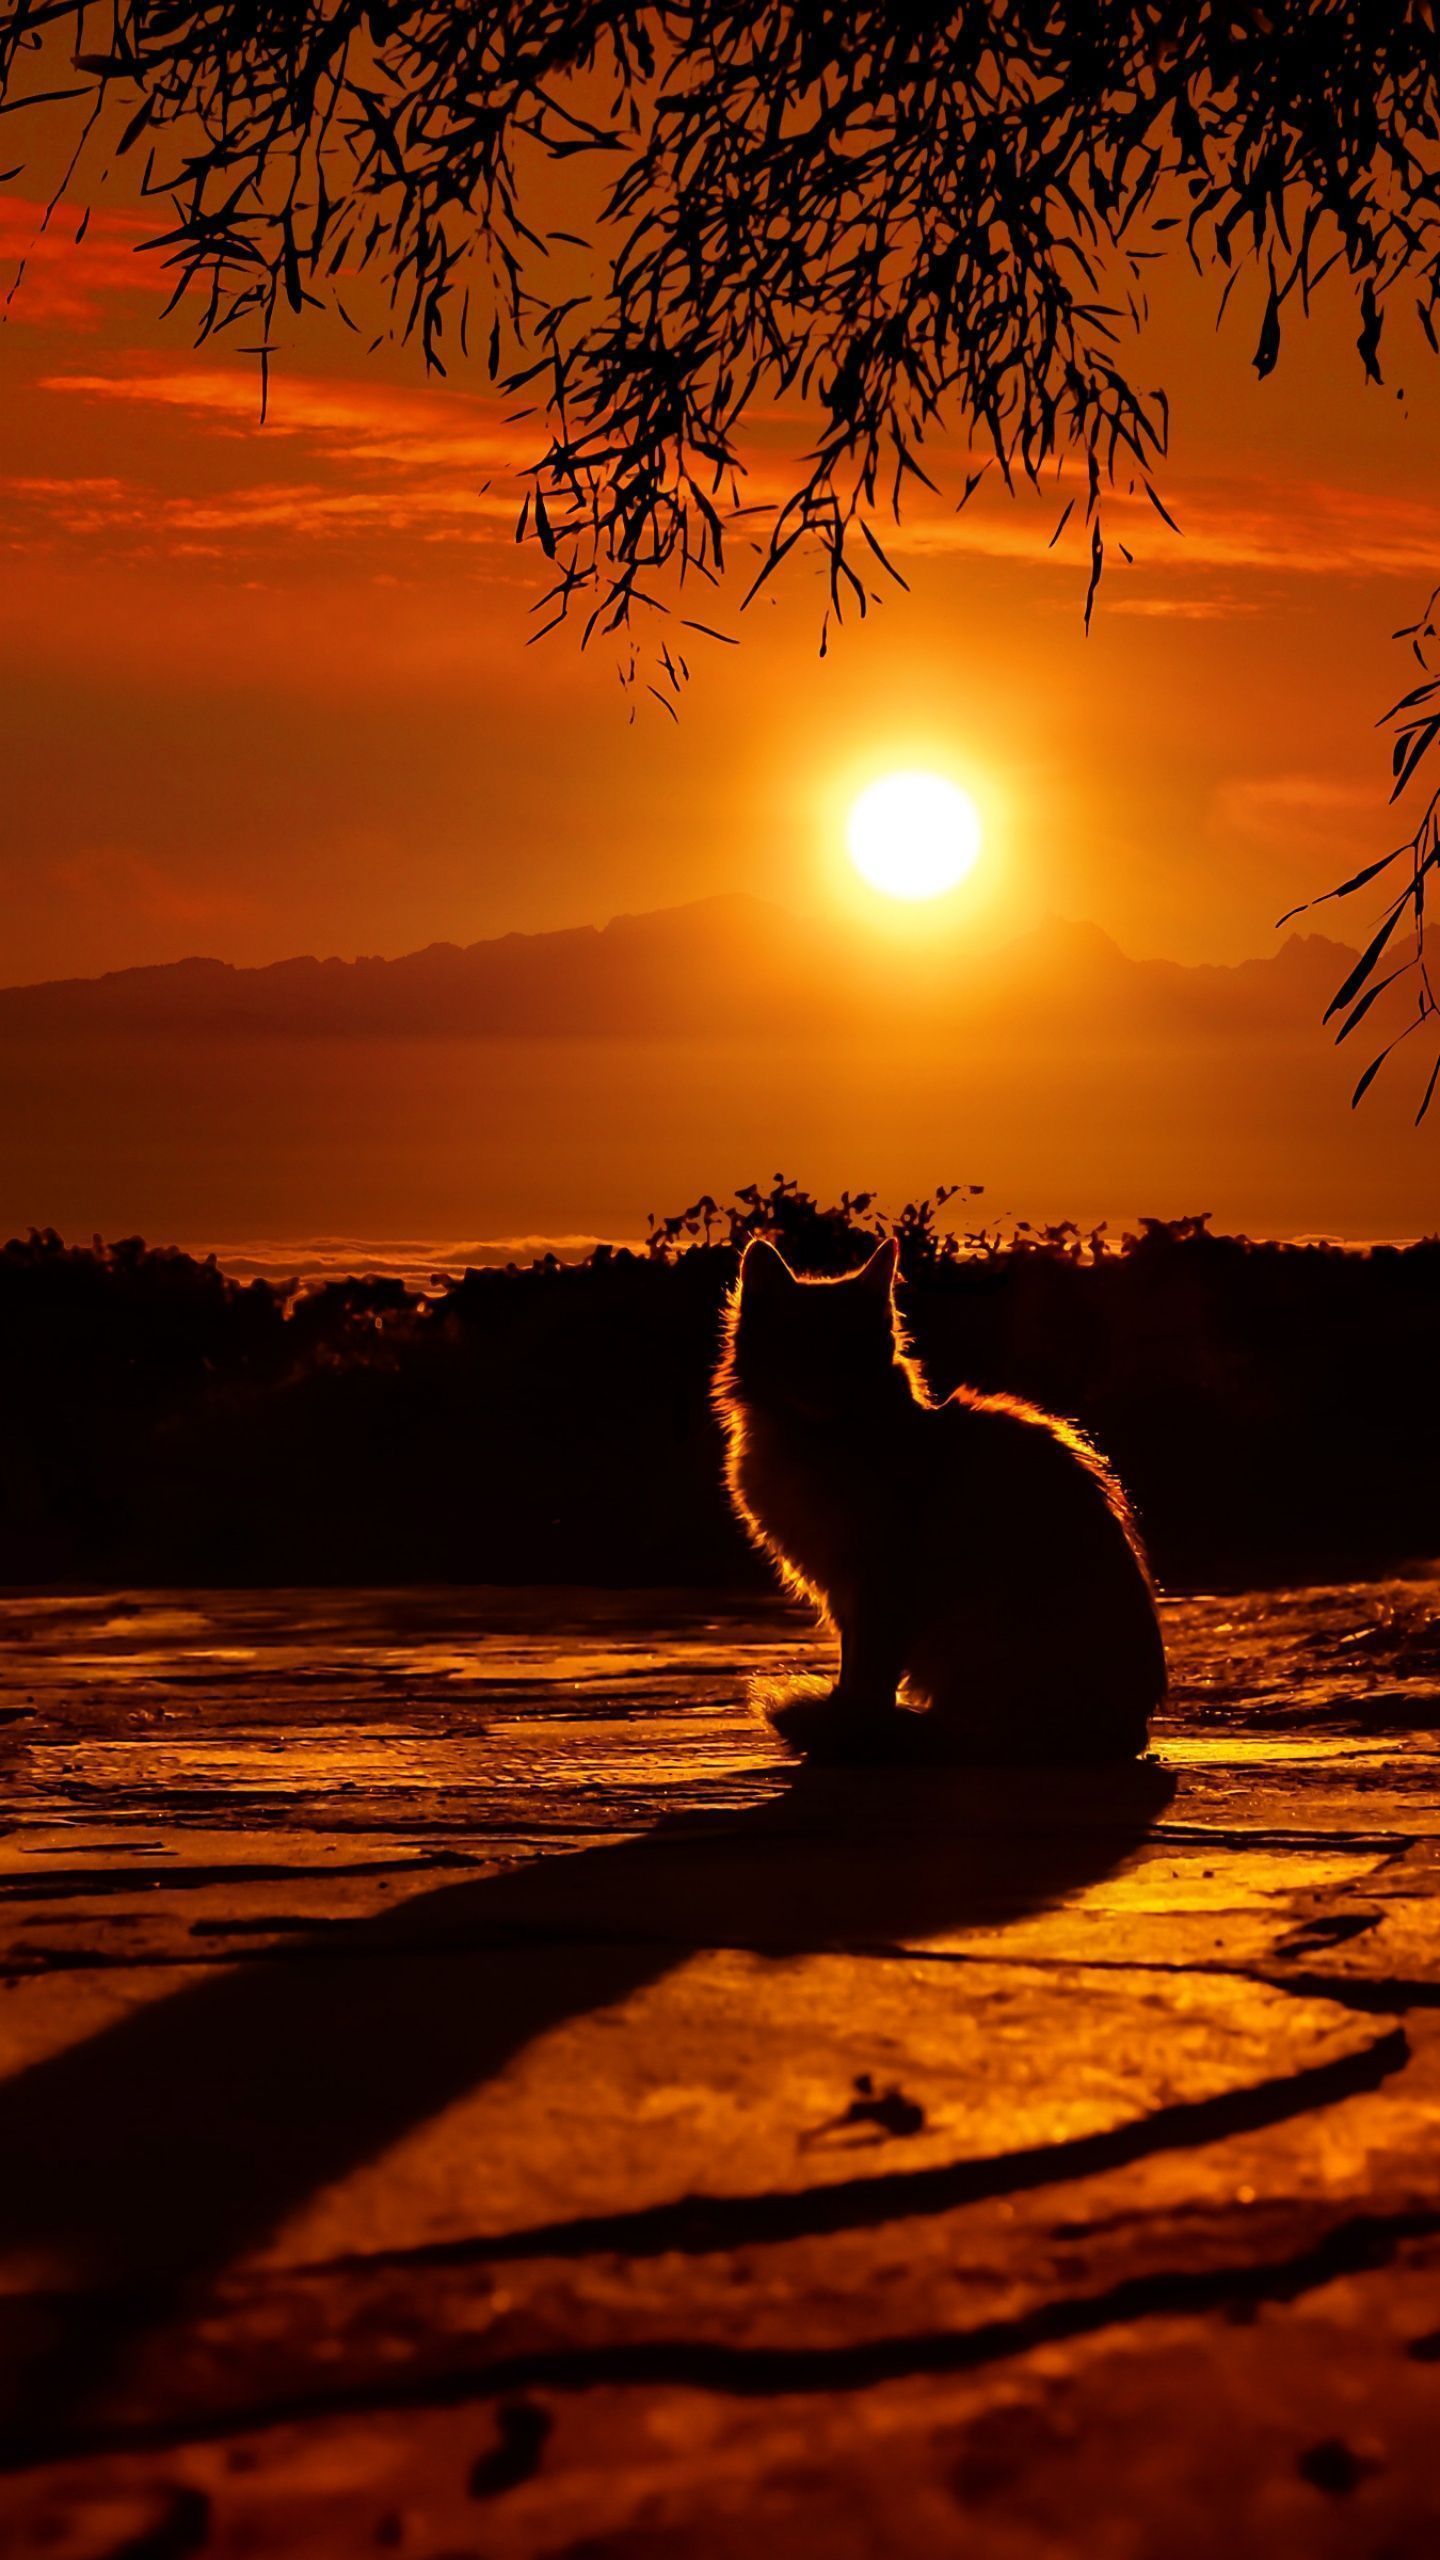 A cat sitting underneath the tree at sunset - Sunset, shadow